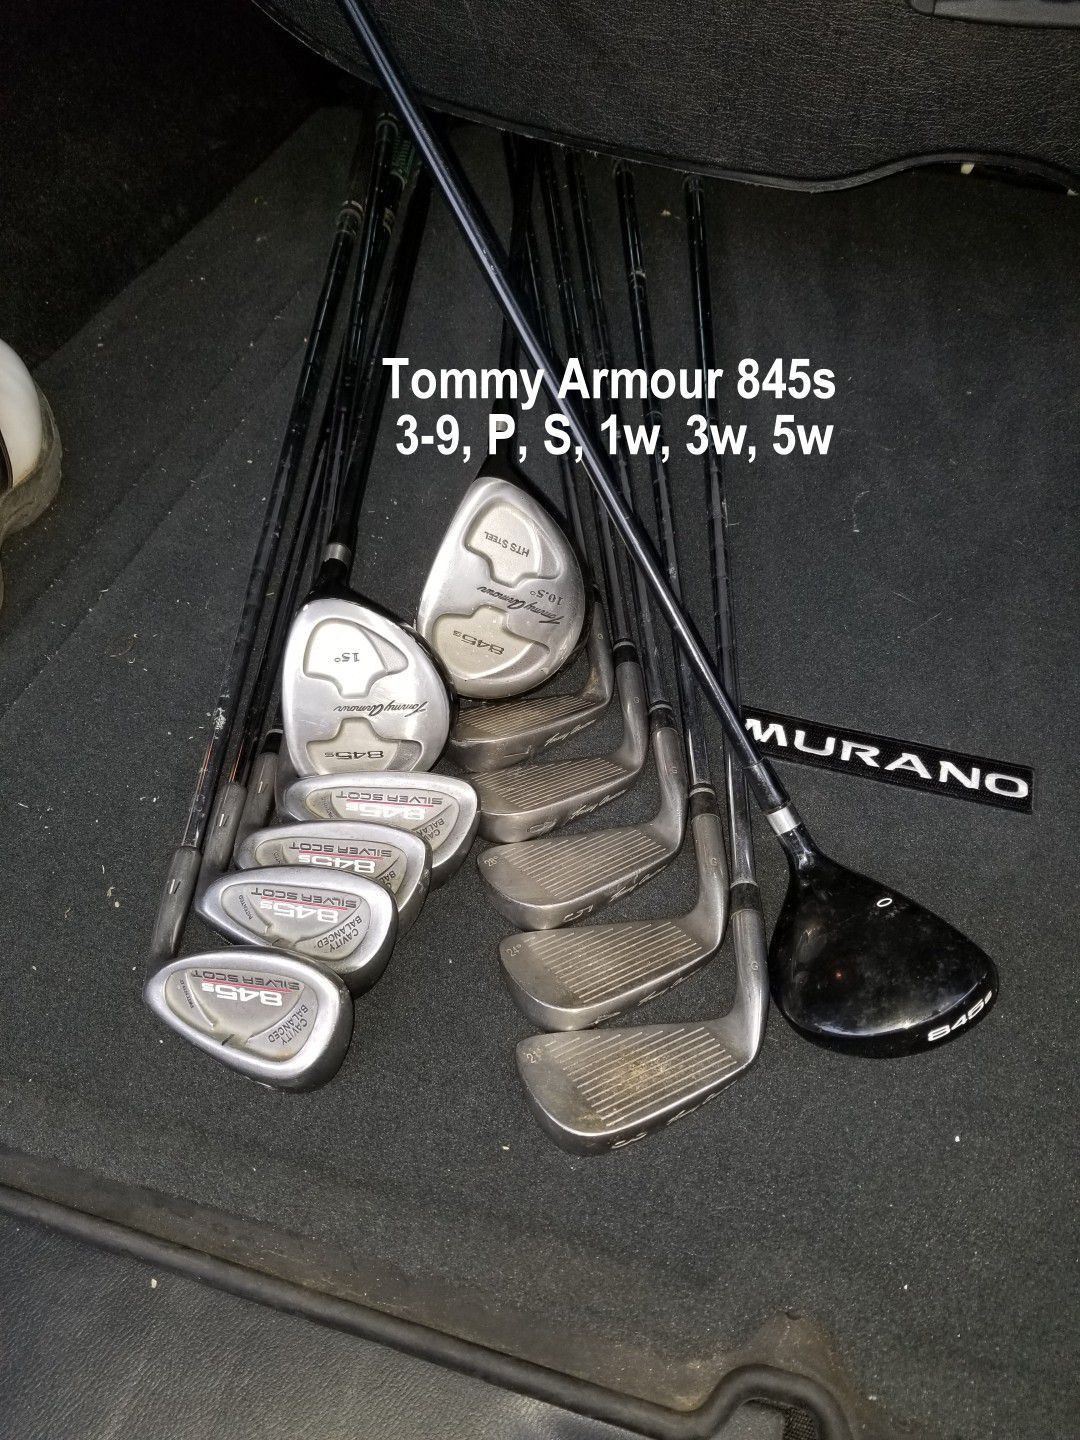 Tommy Armour 845s golf set